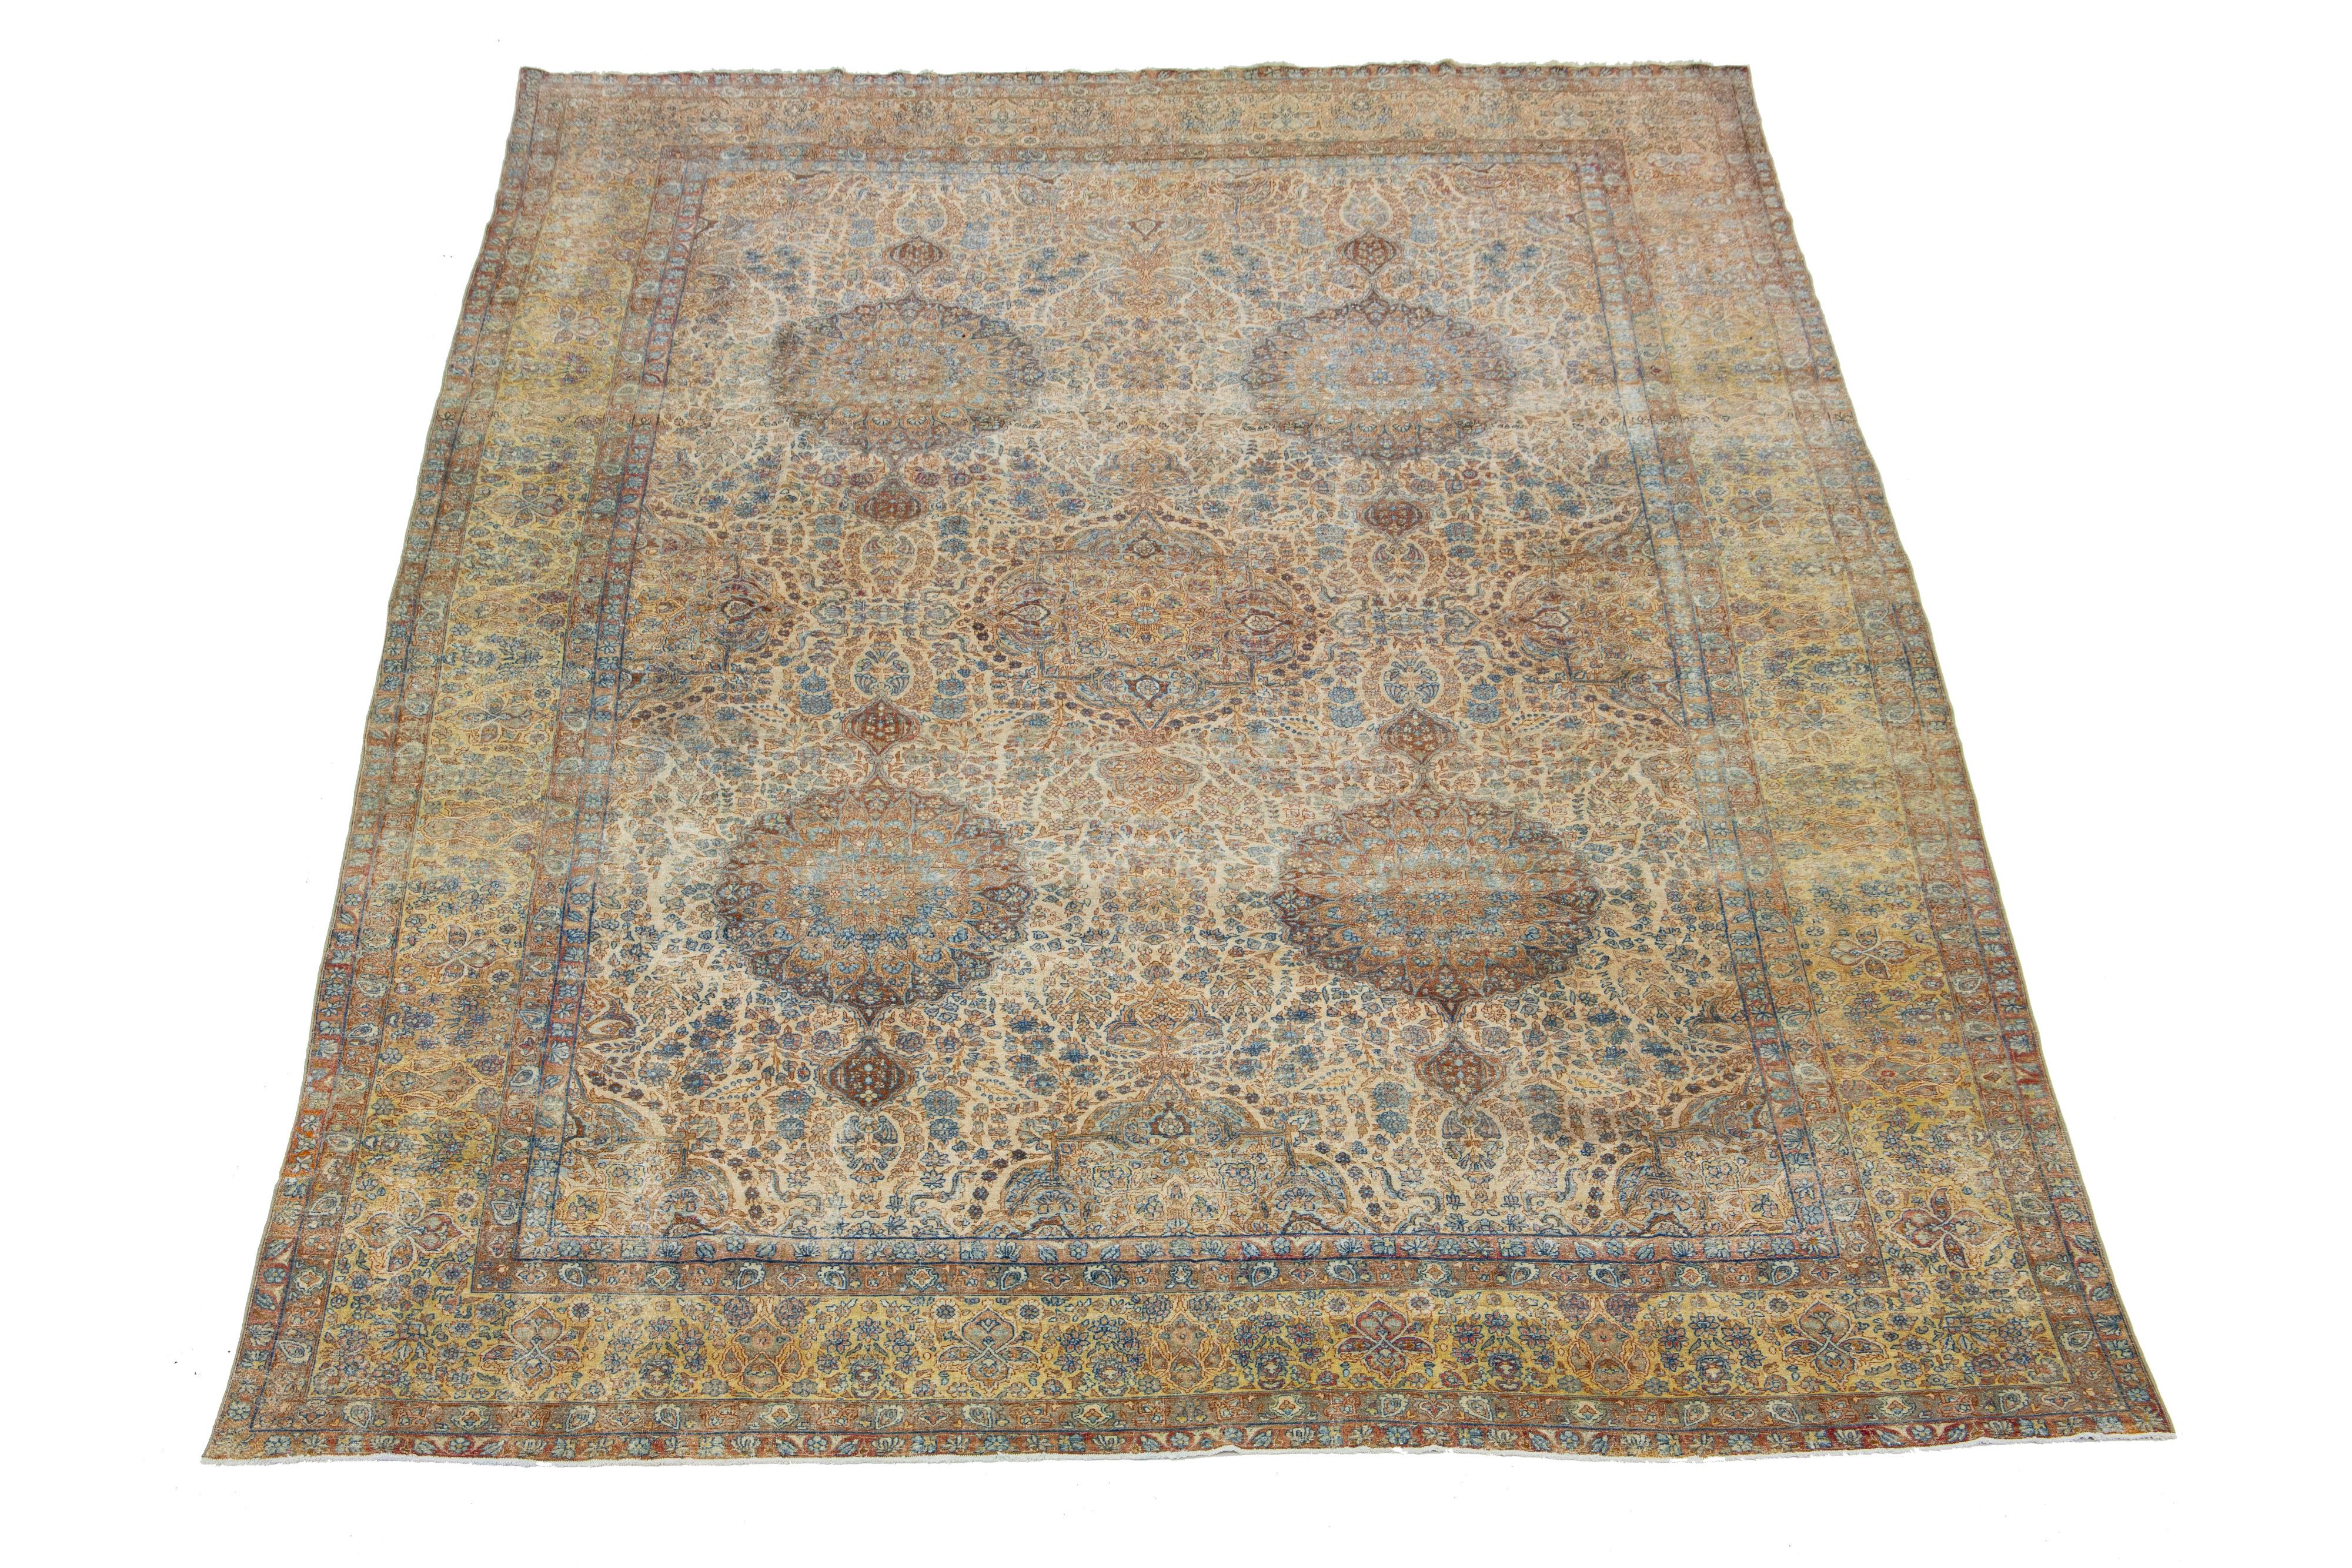 This exquisite, hand-knotted wool rug from Kerman boasts a charming antique finish. The rug's warm beige-tan color field is adorned with a stunning, all-over rosette pattern, highlighted by hints of rich blue and rust—a remarkable piece of Persian